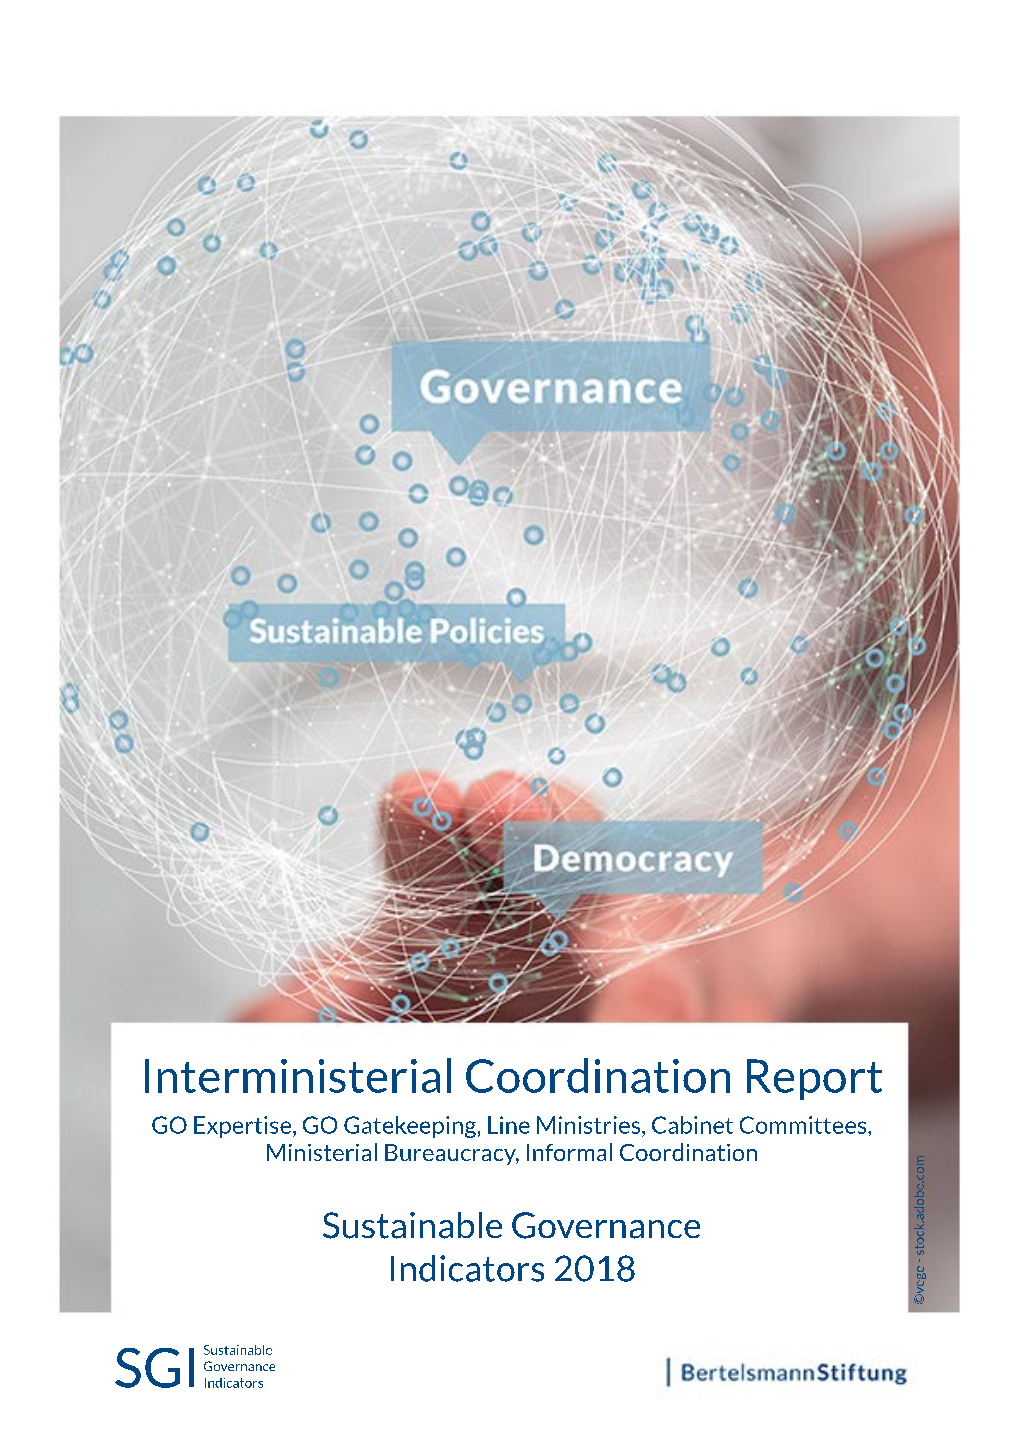 Interministerial Coordination Report GO Expertise, GO Gatekeeping, Line Ministries, Cabinet Committees, Ministerial Bureaucracy, Informal Coordination M O C